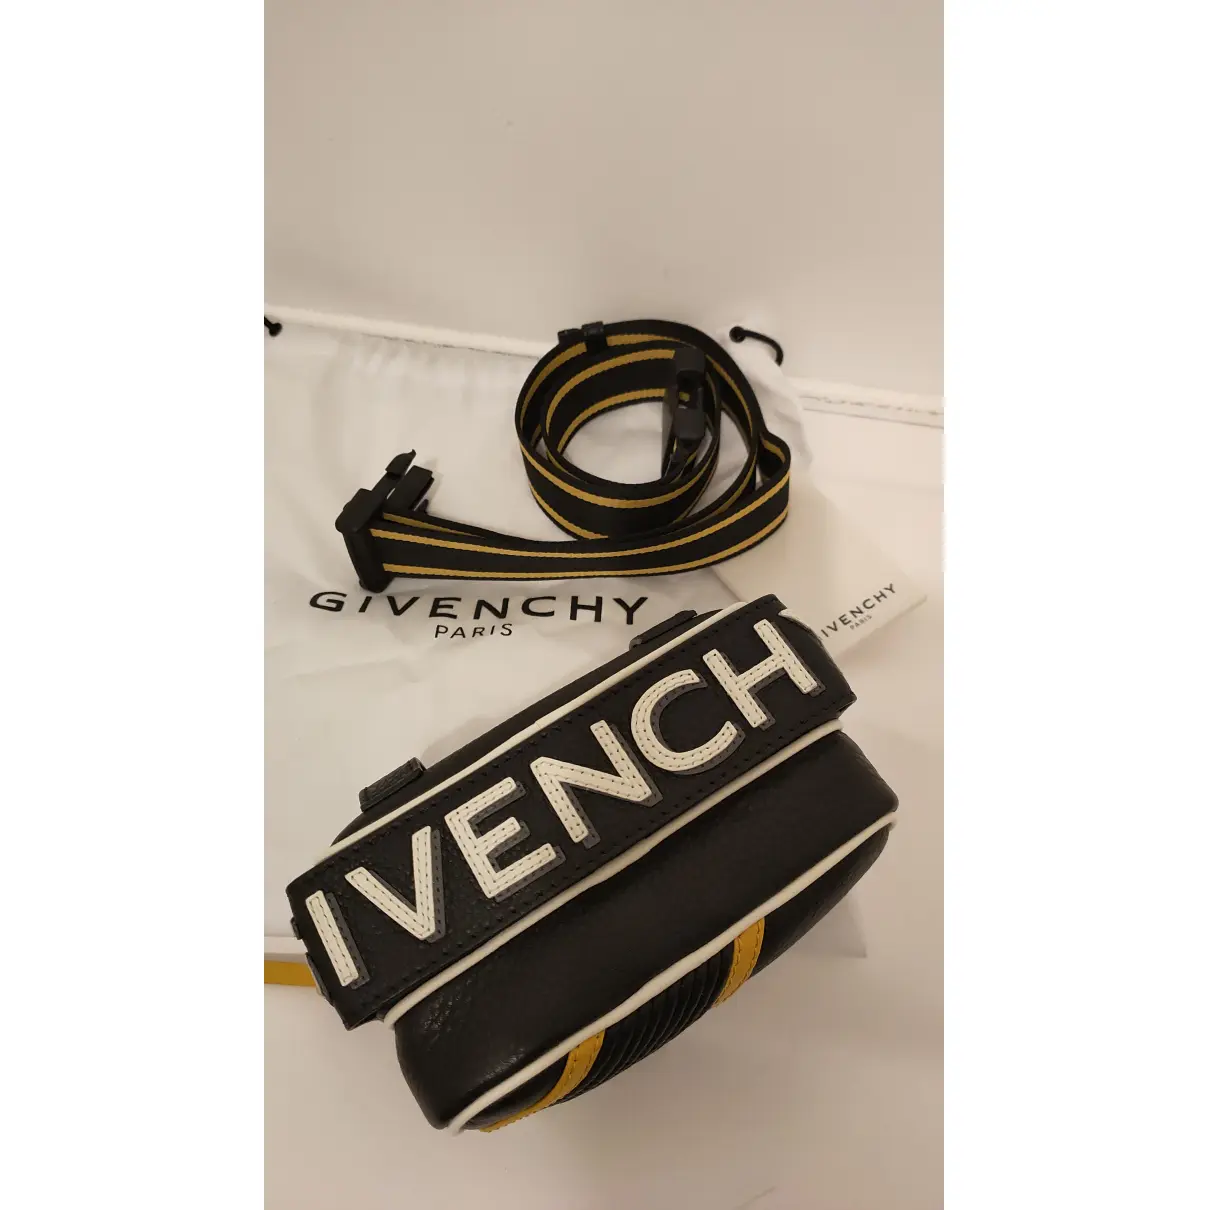 Leather clutch bag Givenchy